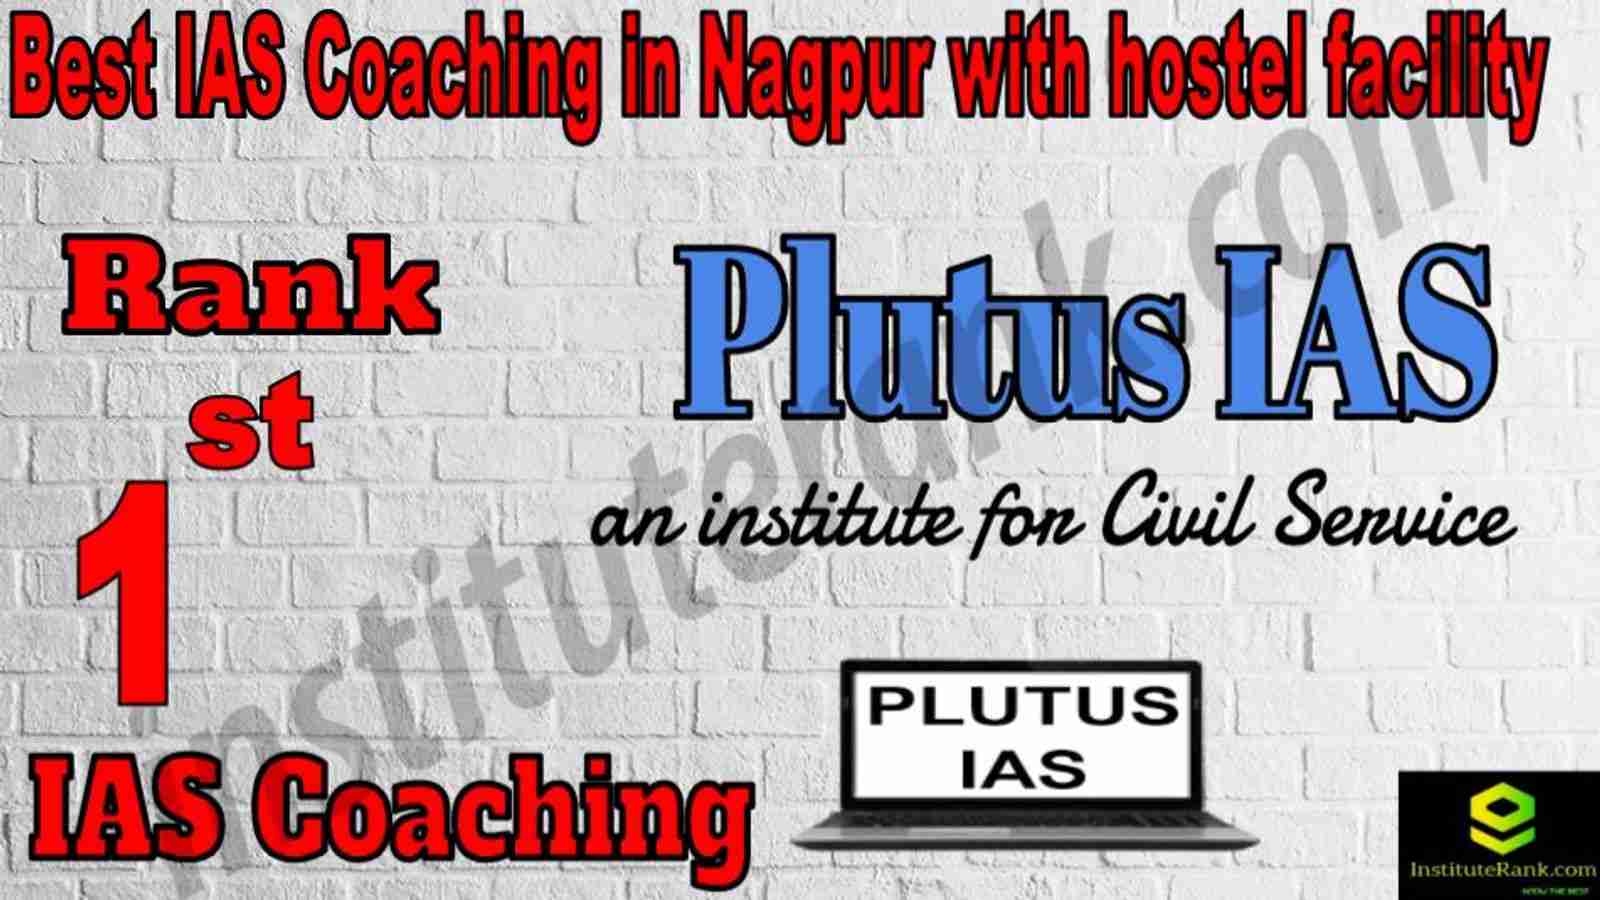 1st Best IAS Coaching in Nagpur with hostel facility